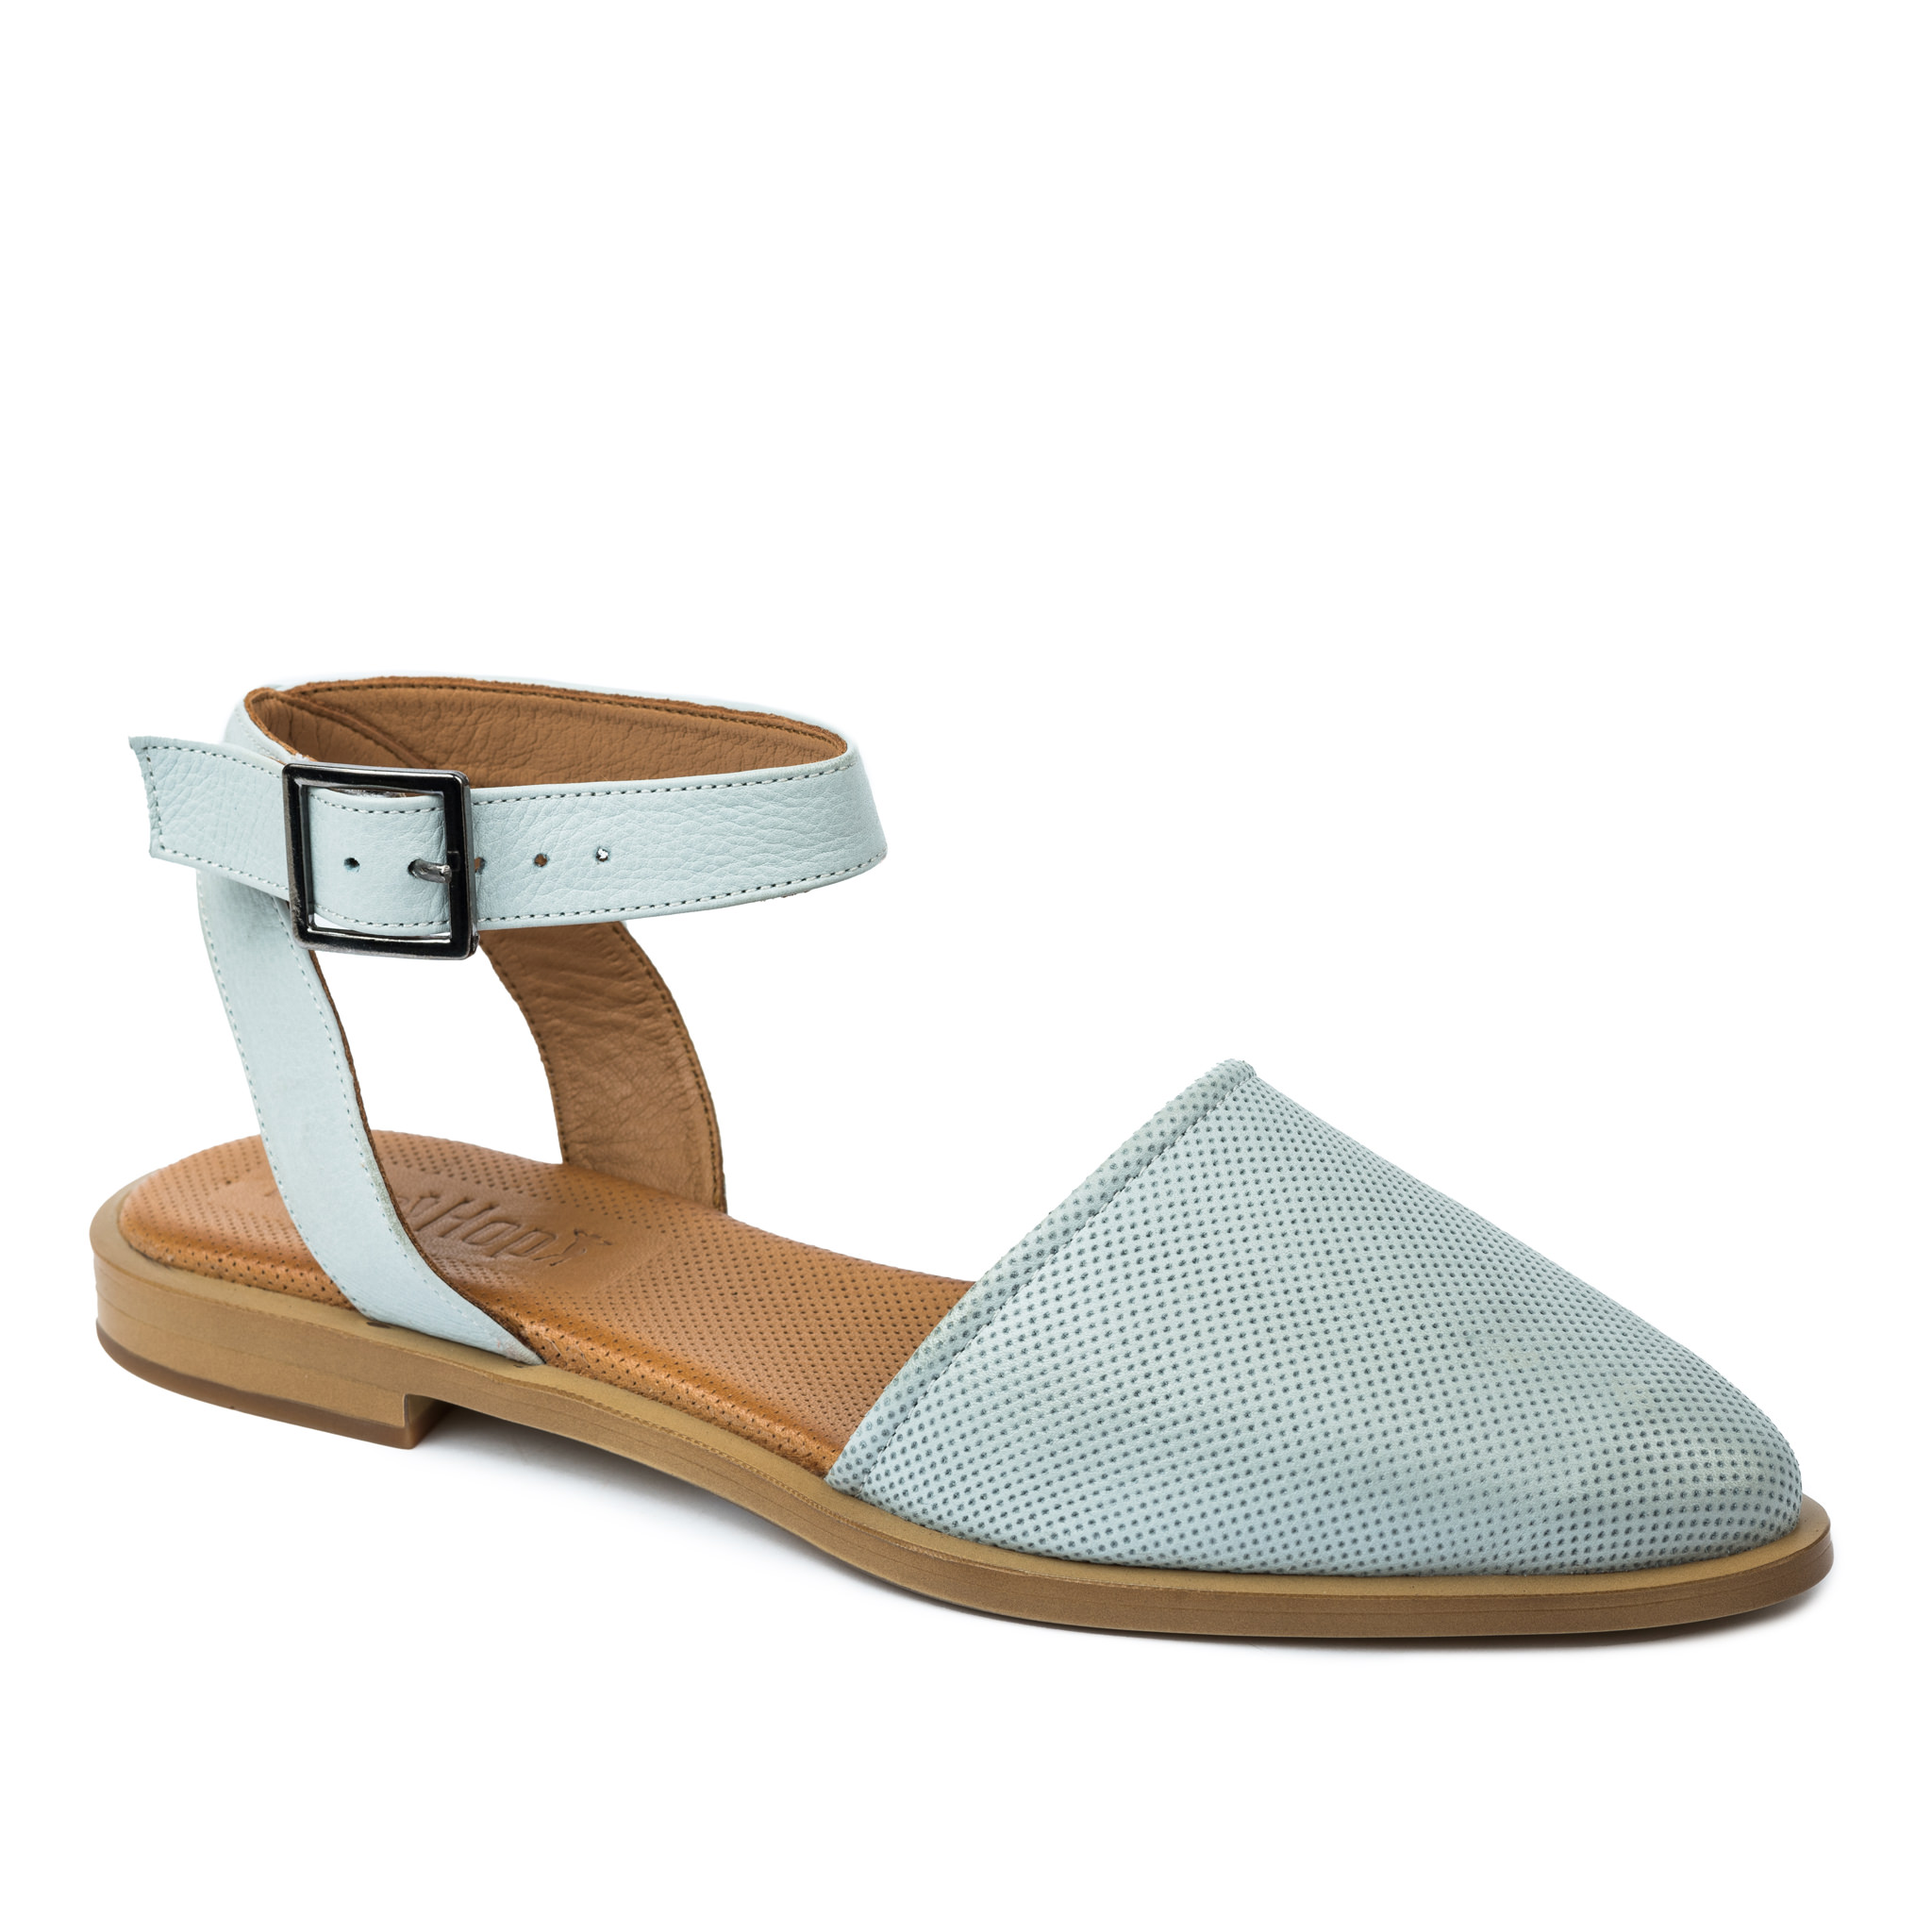 Leather sandals A697 - BLUE